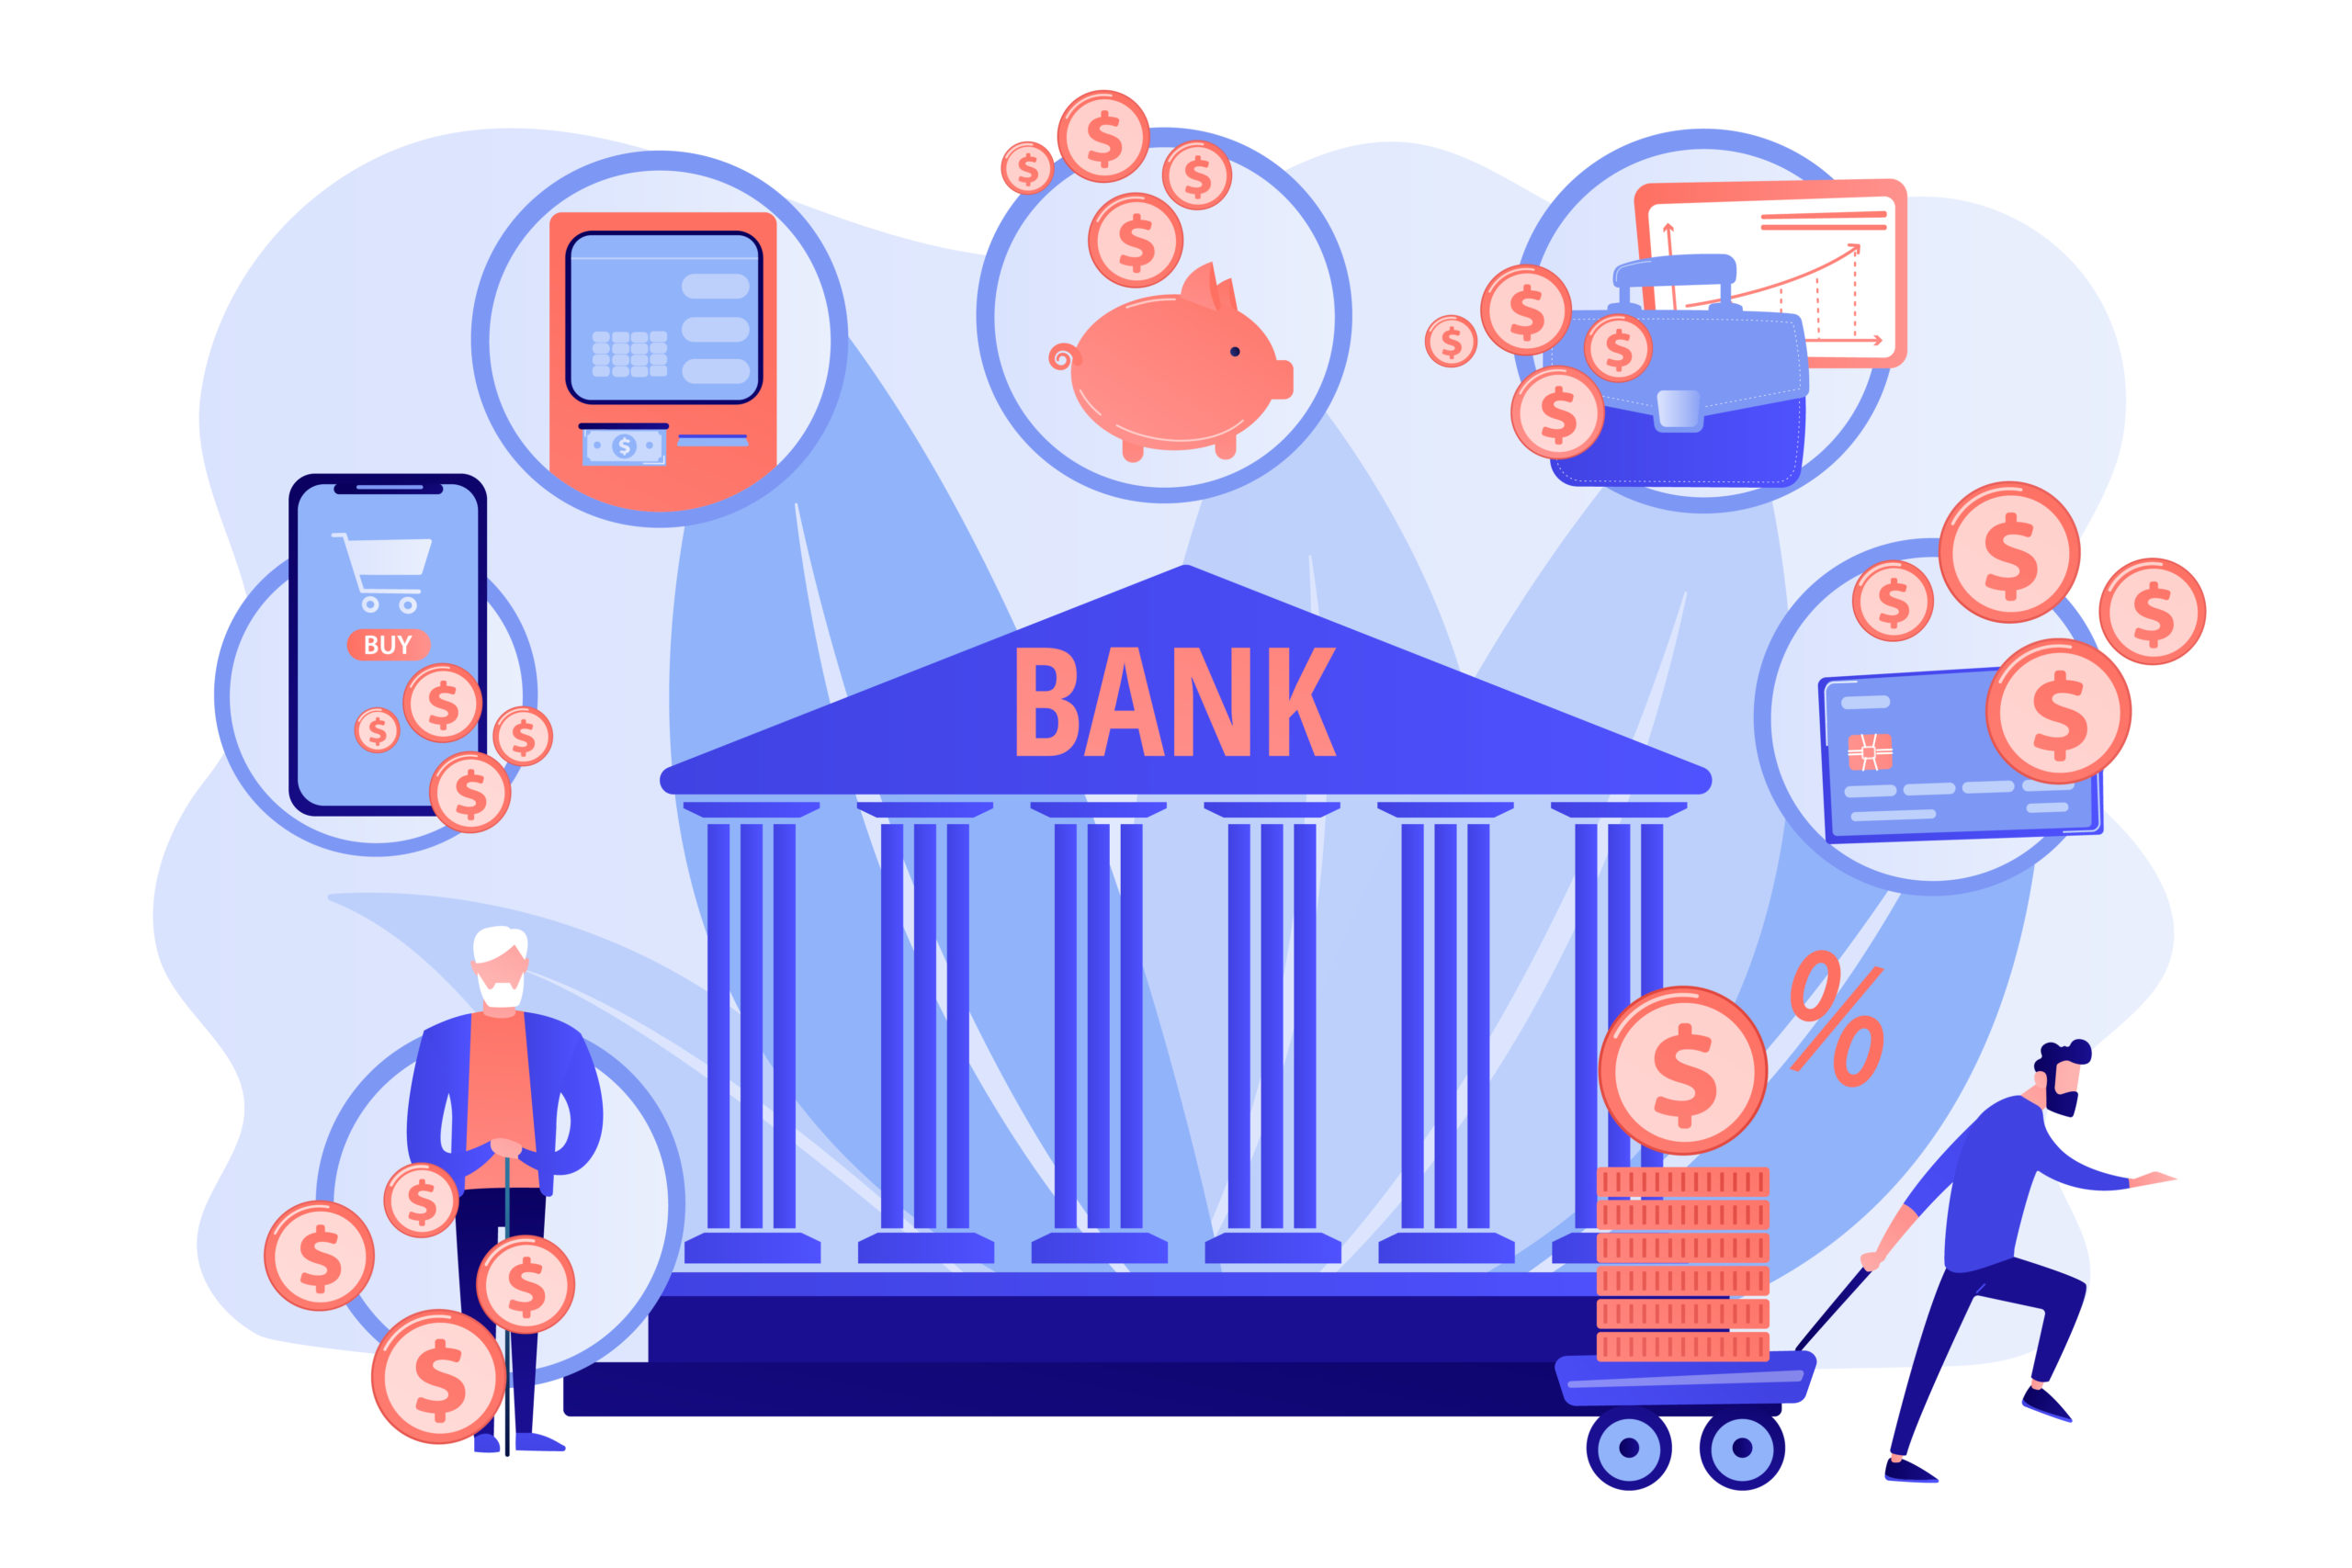 Business Process Automation (BPA) in the Banking Industry